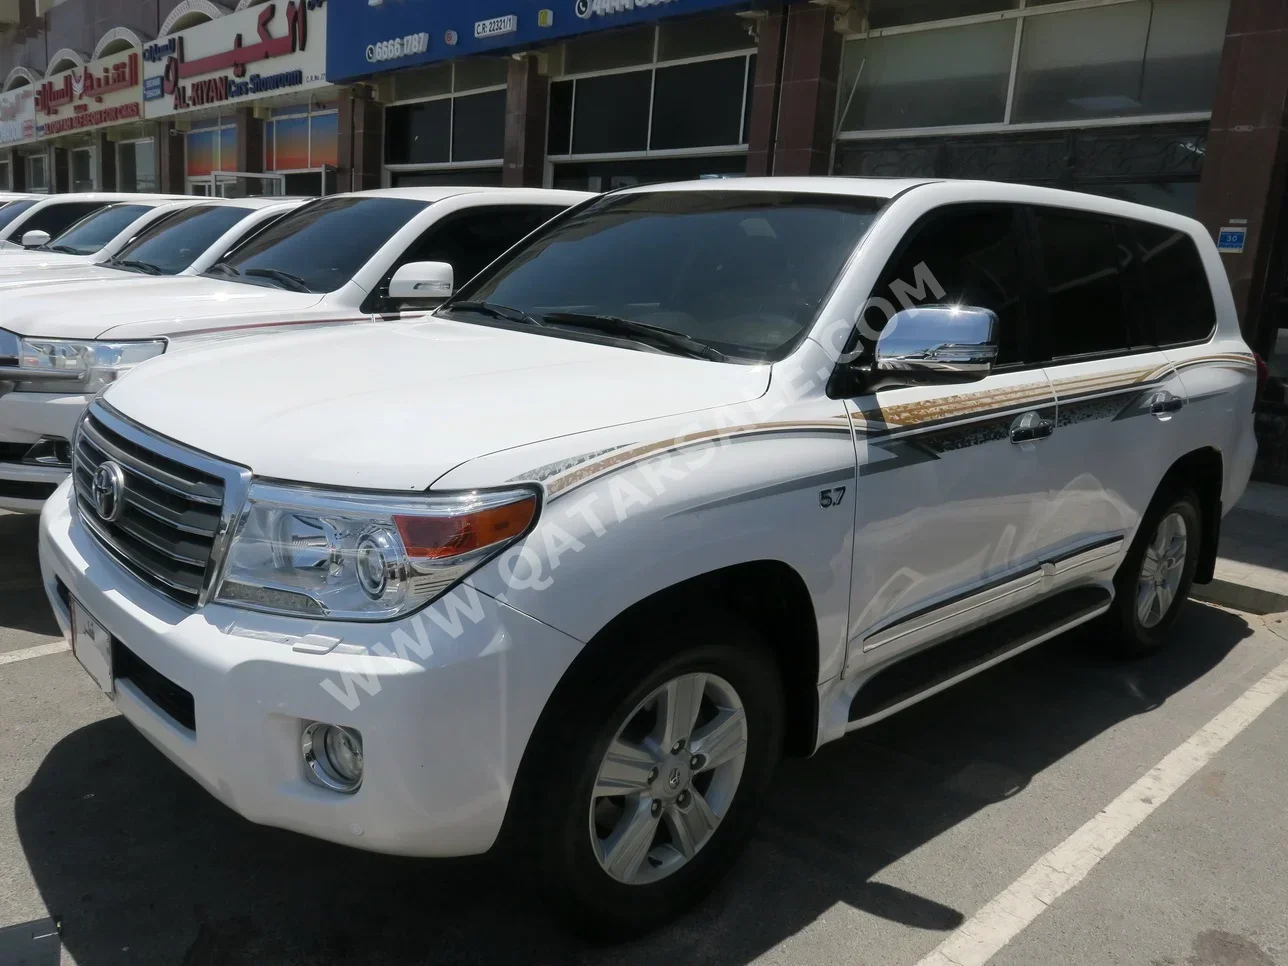  Toyota  Land Cruiser  VXR  2013  Automatic  319,000 Km  8 Cylinder  Four Wheel Drive (4WD)  SUV  White  With Warranty